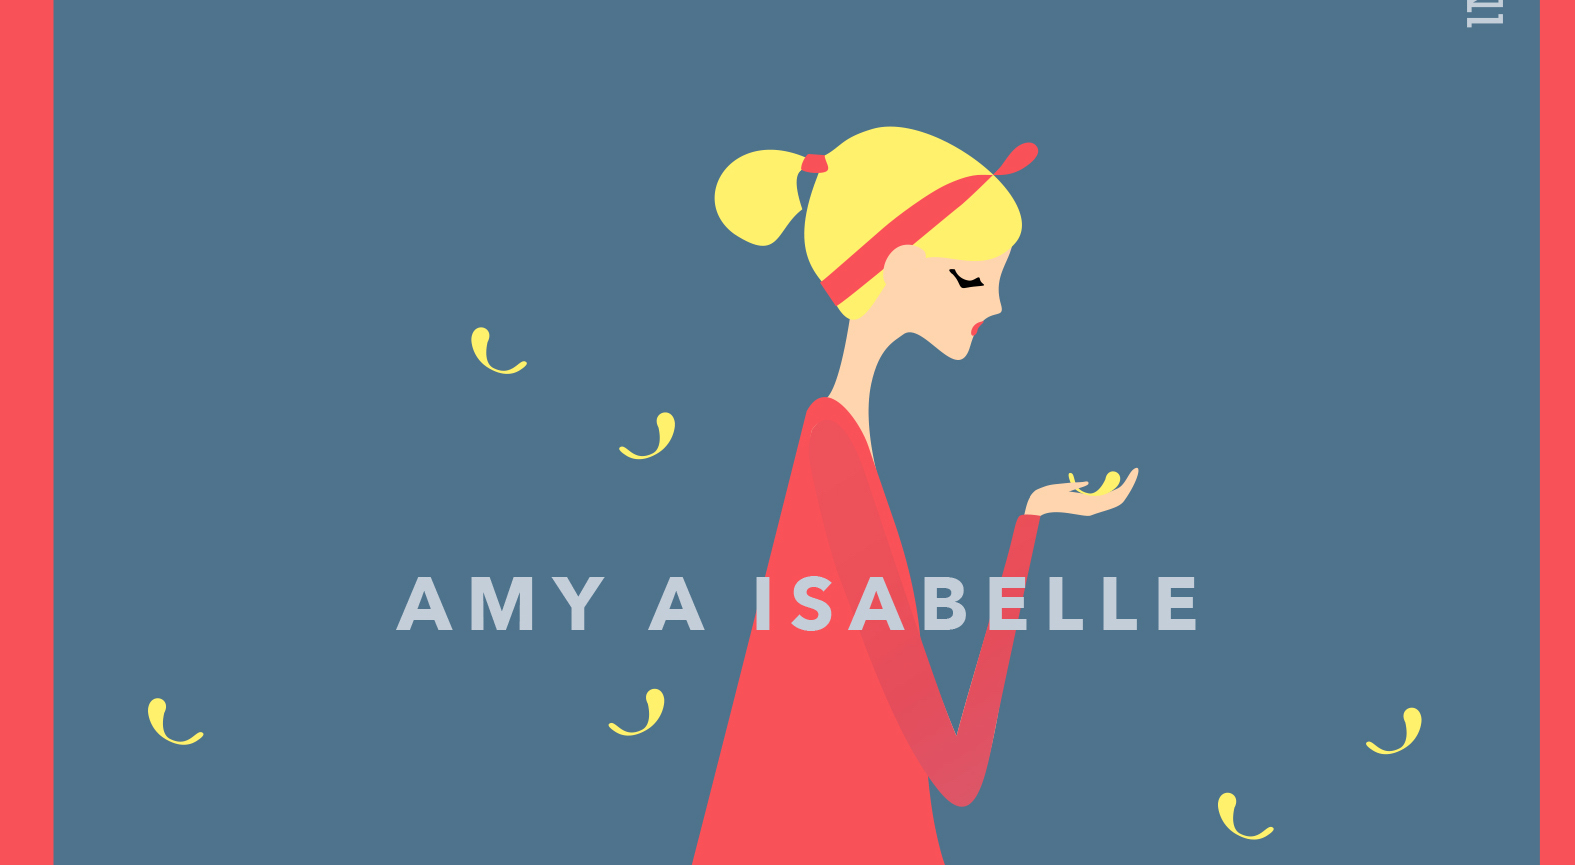 amy a isabelle